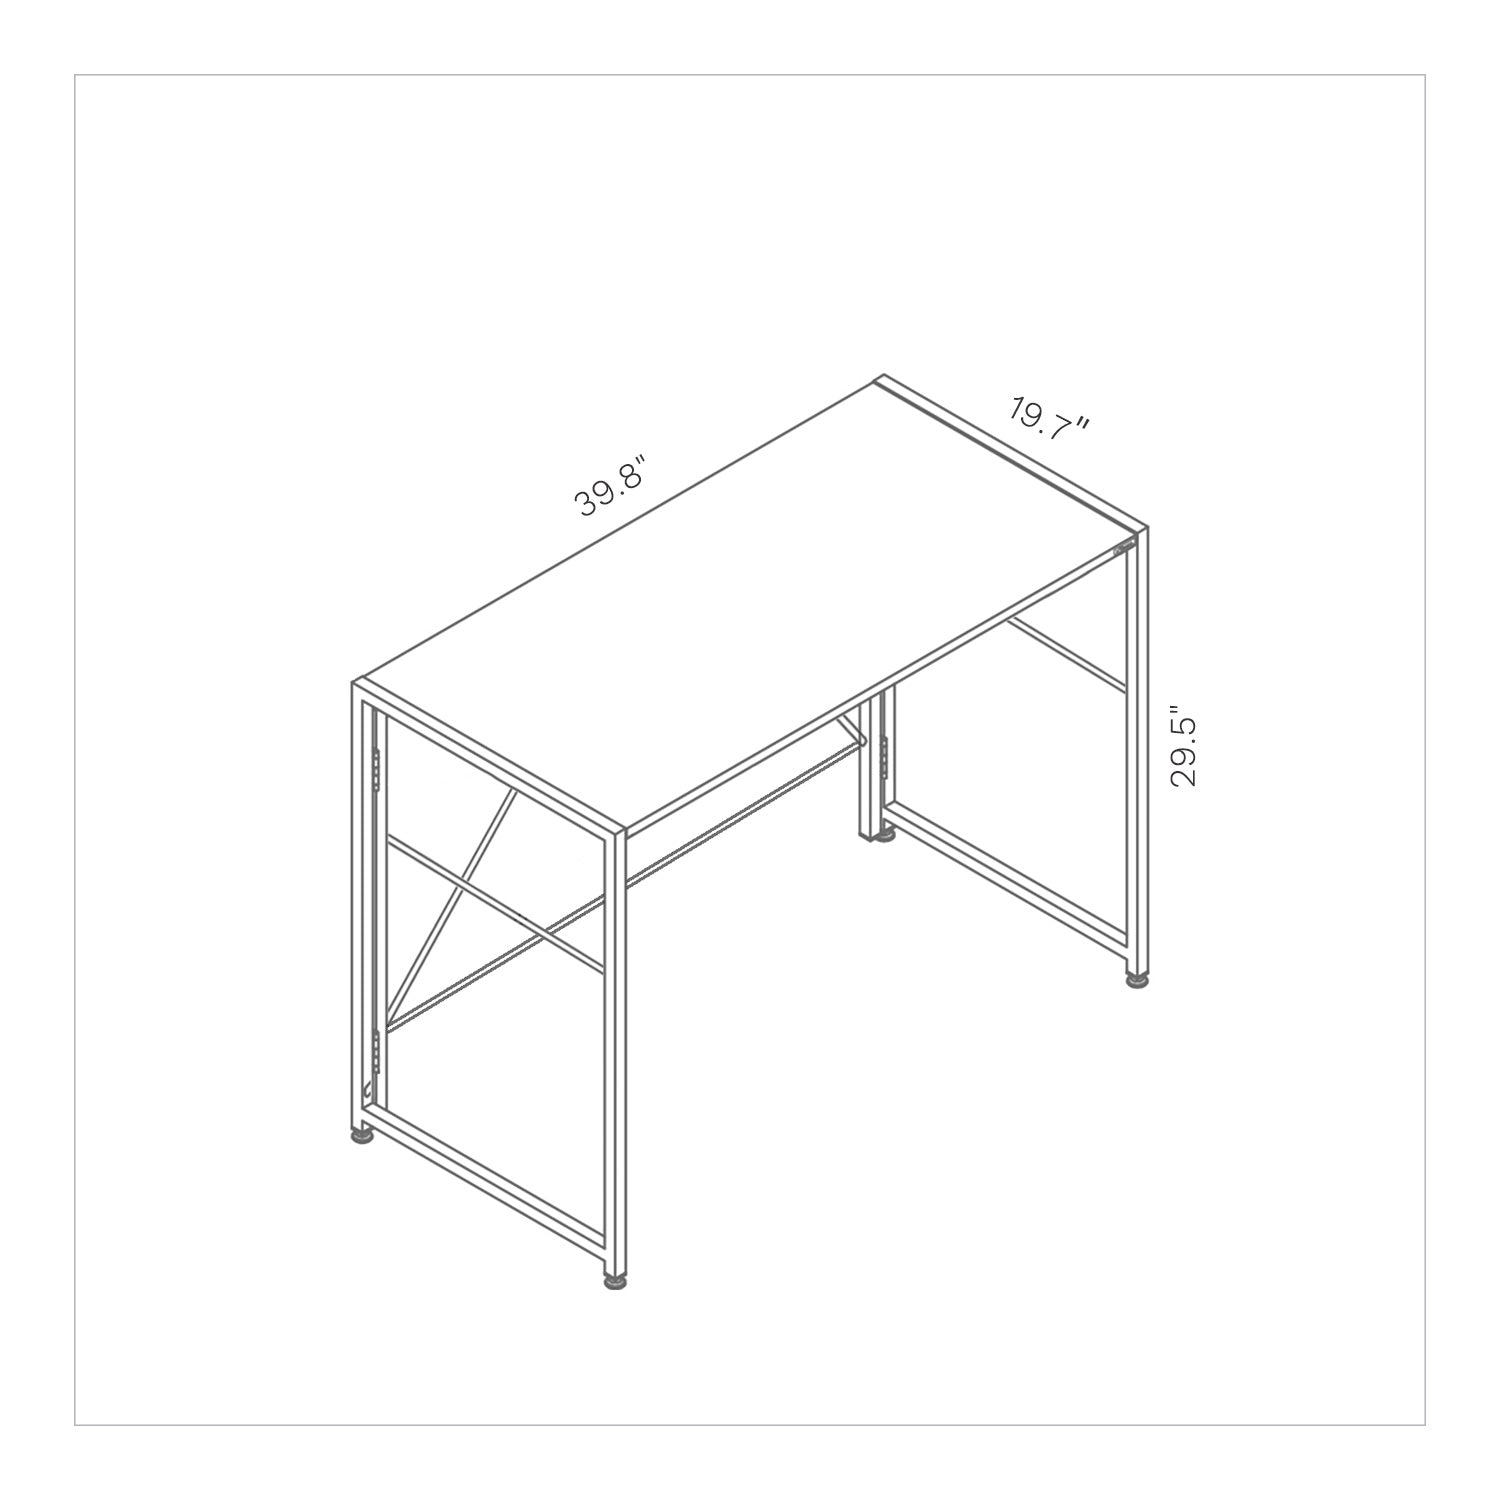 SOFSYS Modern Folding Computer Writing Desk for Small Space, Gaming, and Home Office Organization, Foldable Industrial Metal